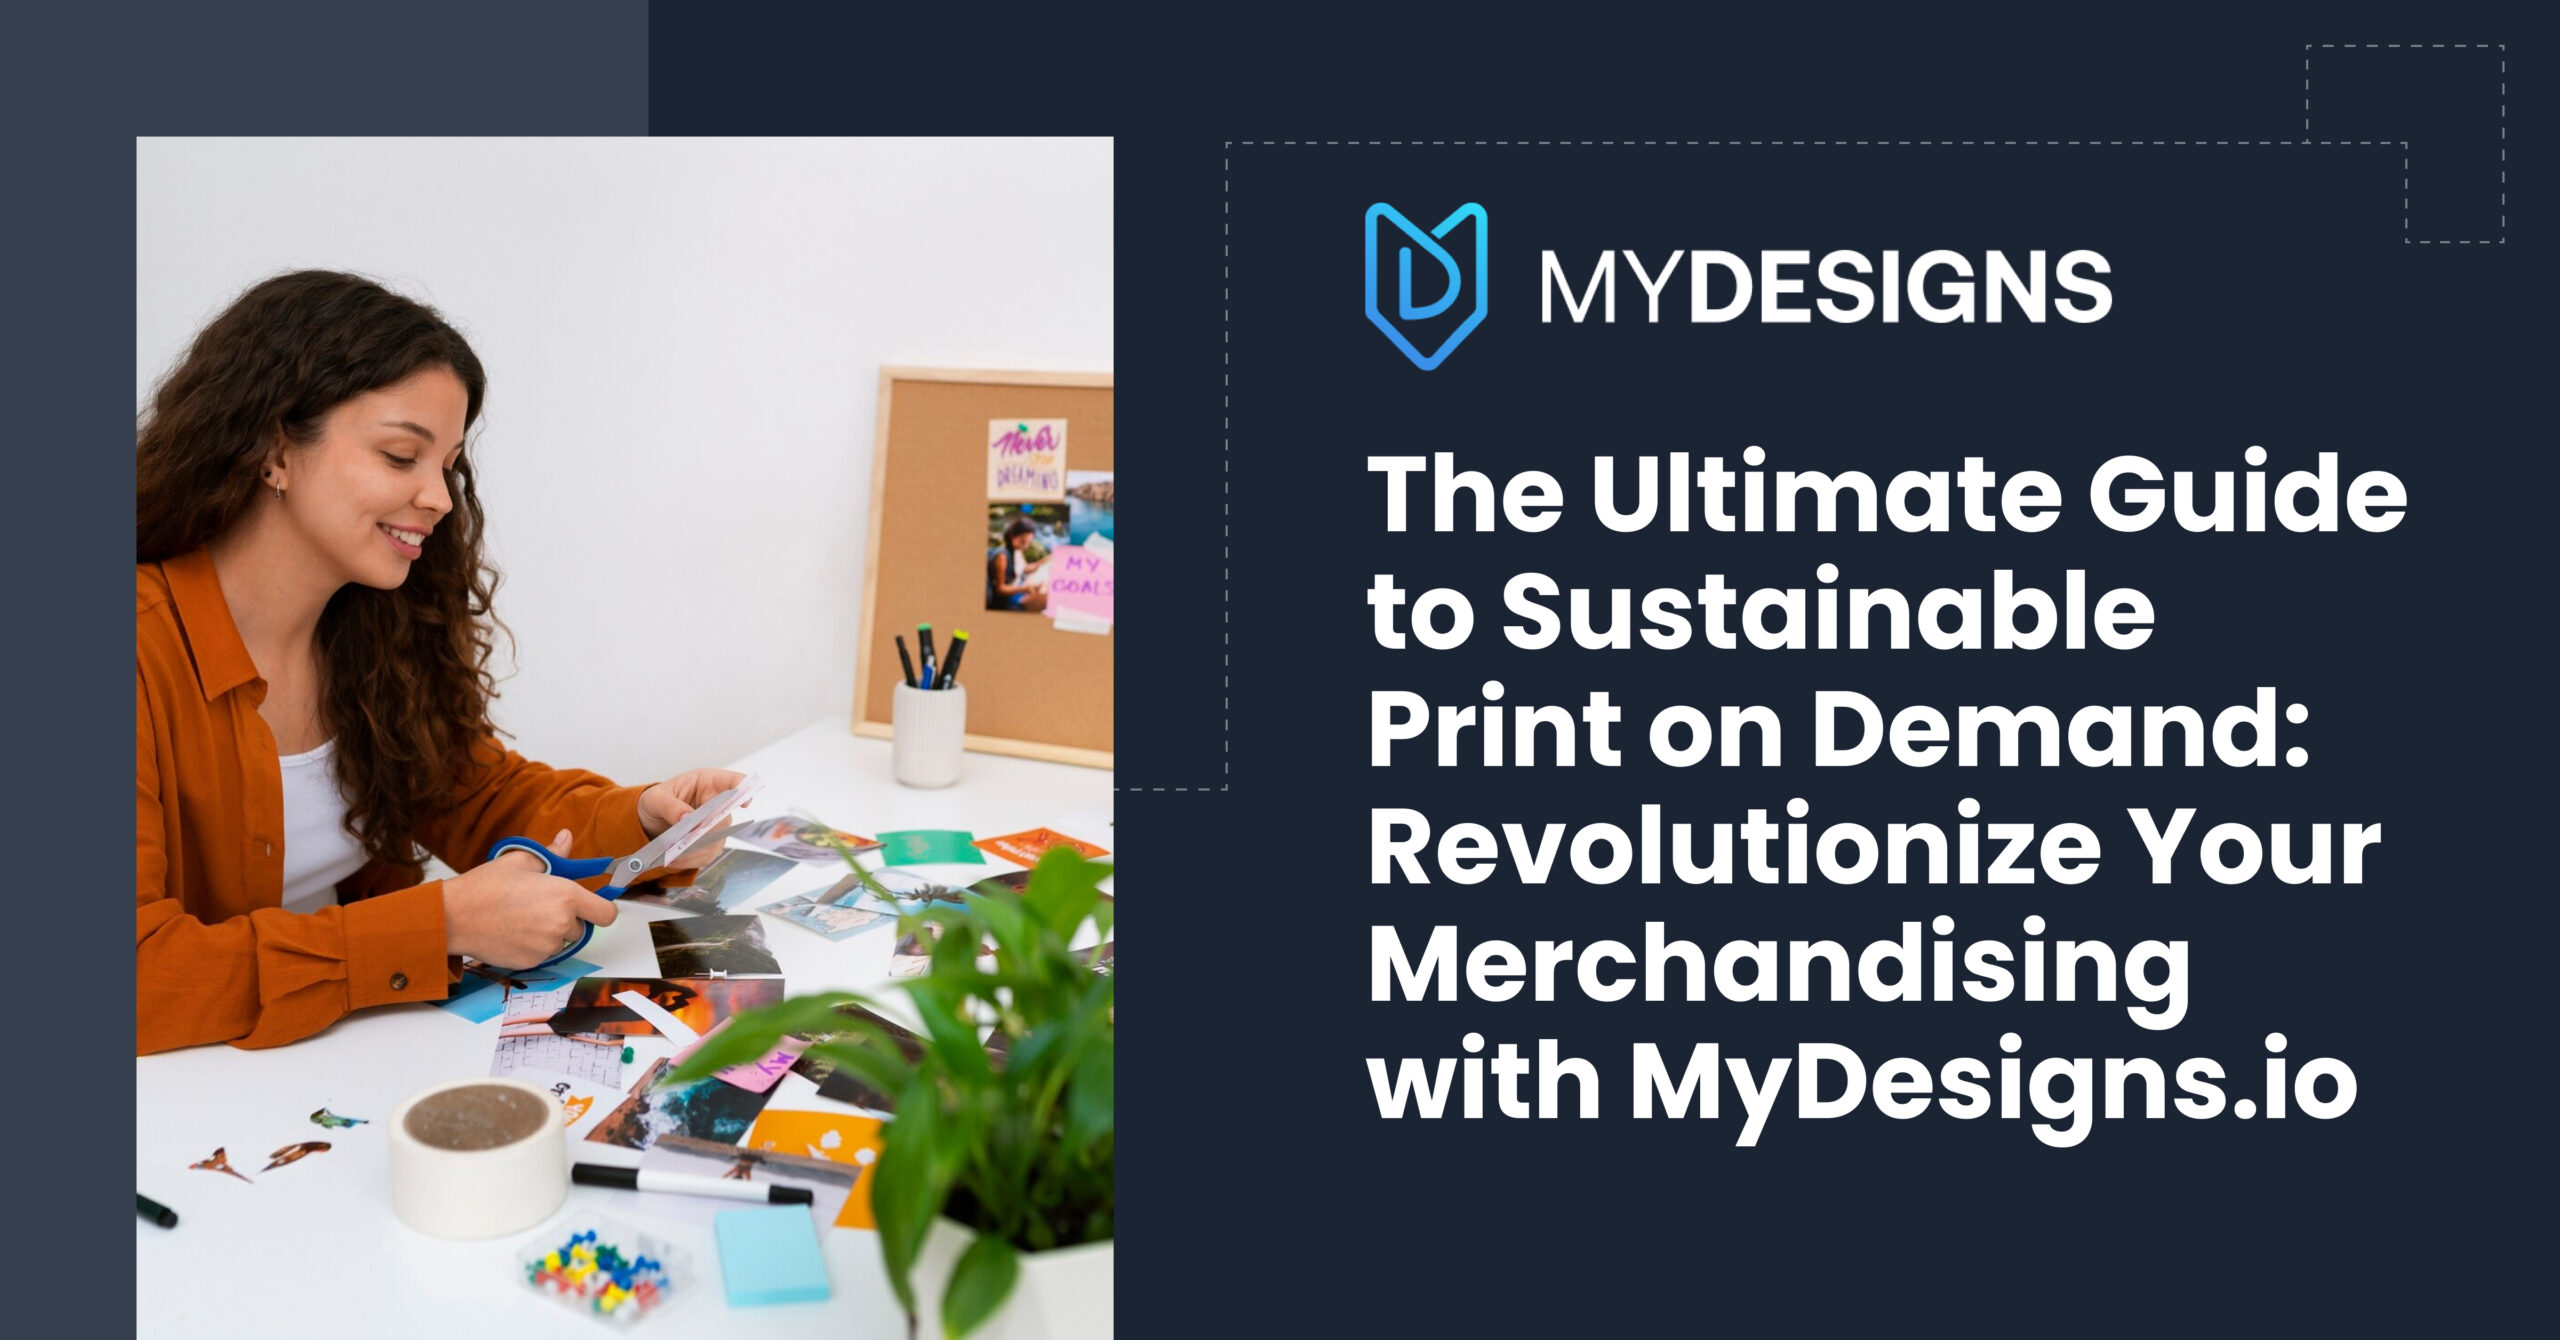 The Ultimate Guide to Sustainable Print on Demand: Revolutionize Your Merchandising with MyDesigns.io - MyDesigns